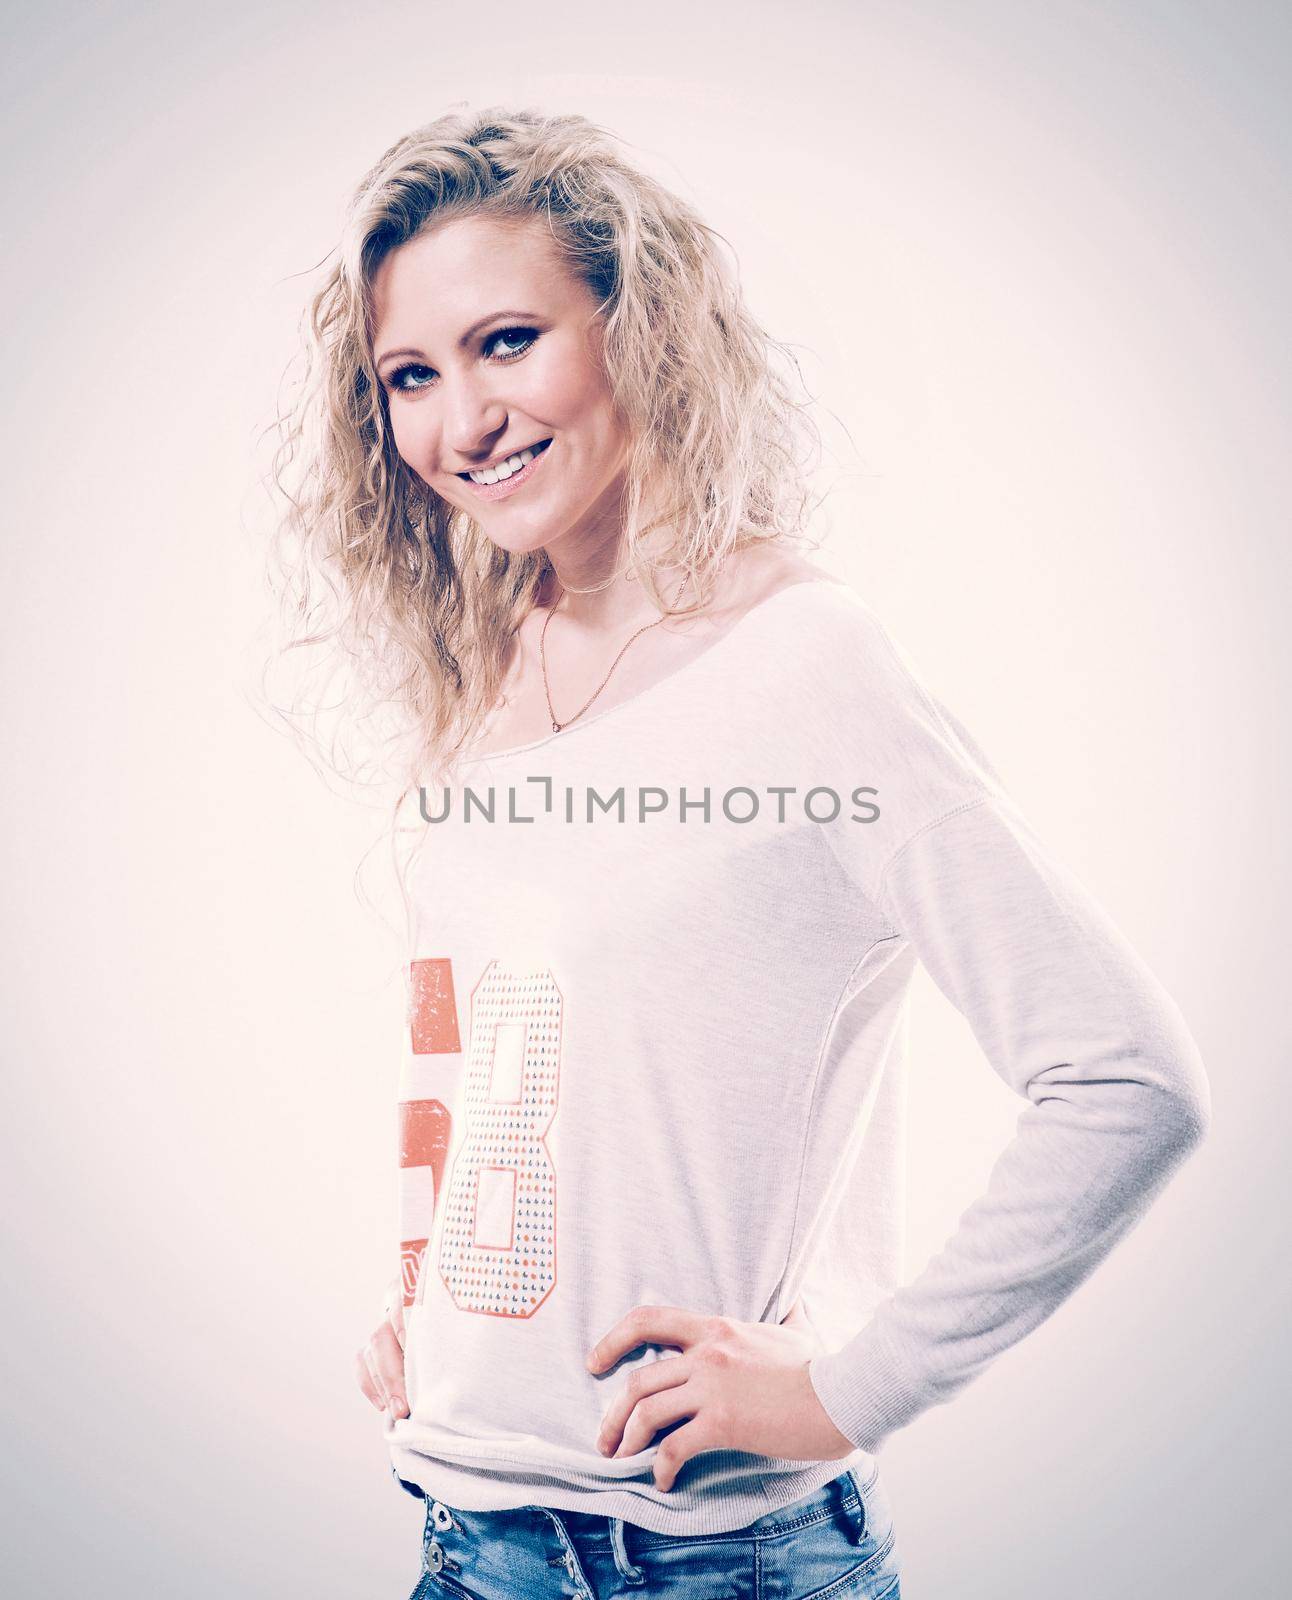 beautiful young woman blonde t-shirt and jeans on white background.